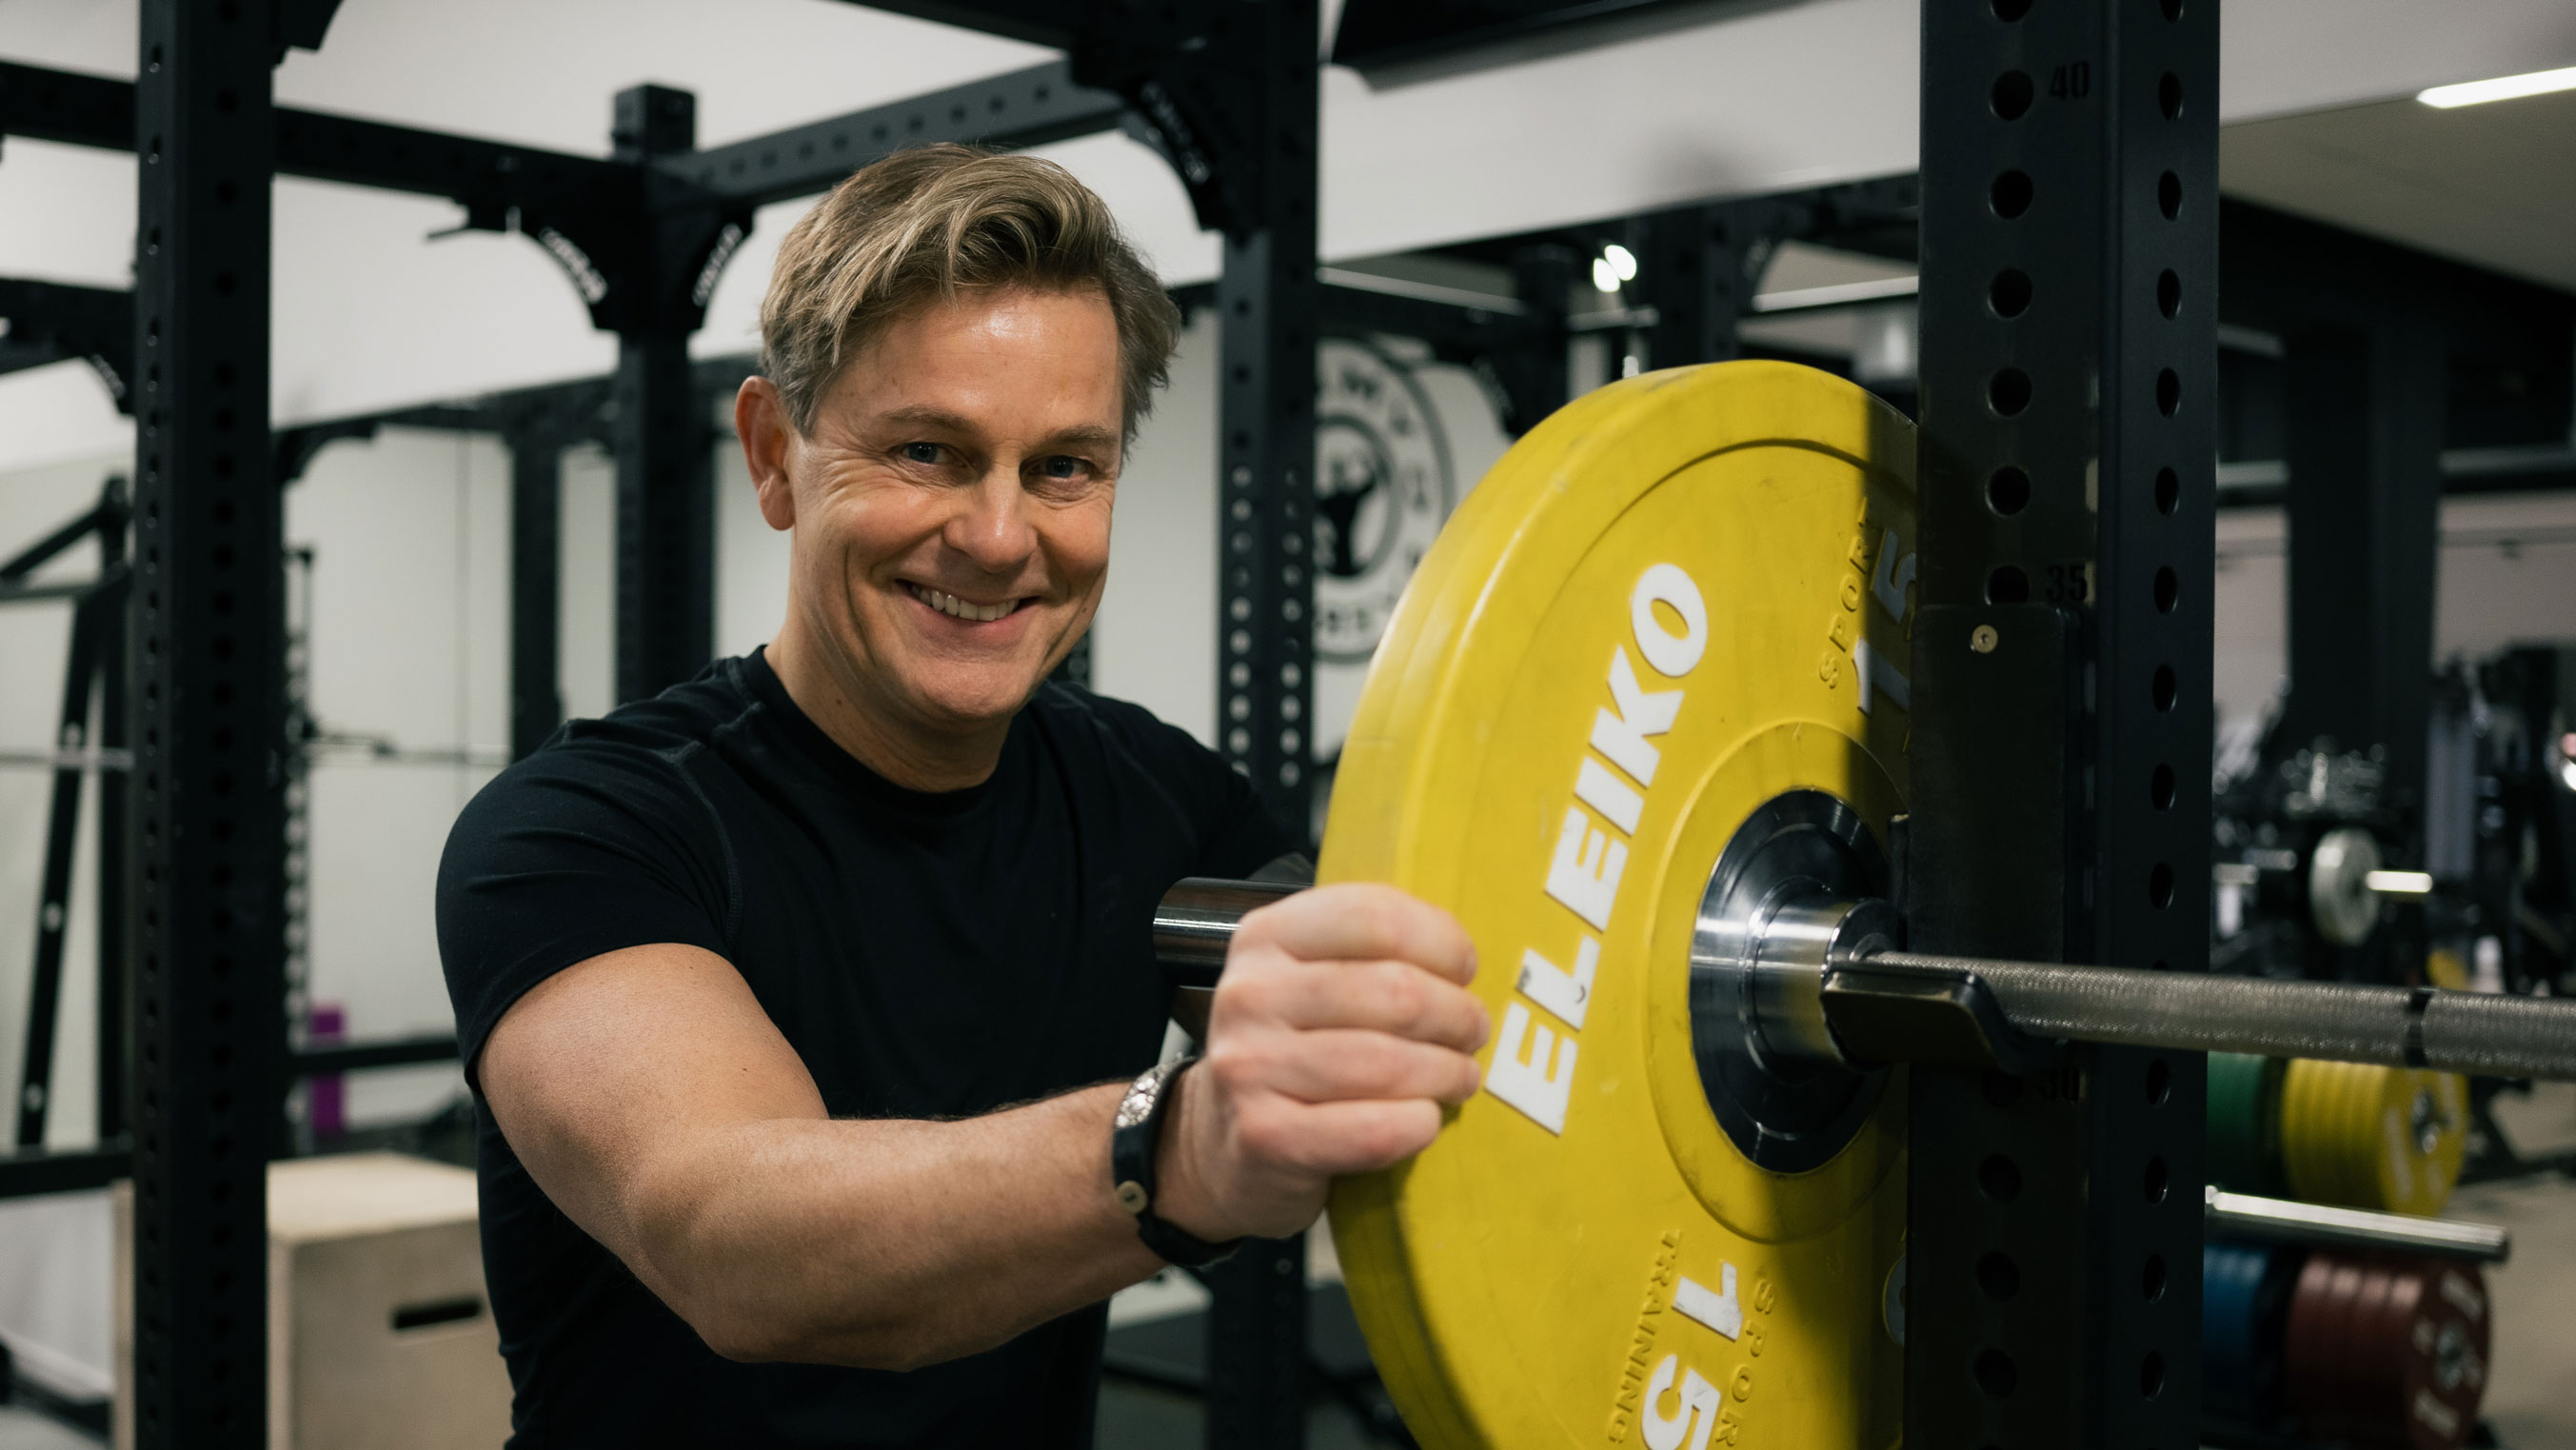 Niklas Wahlgren placing a weight on a bar in gym setting